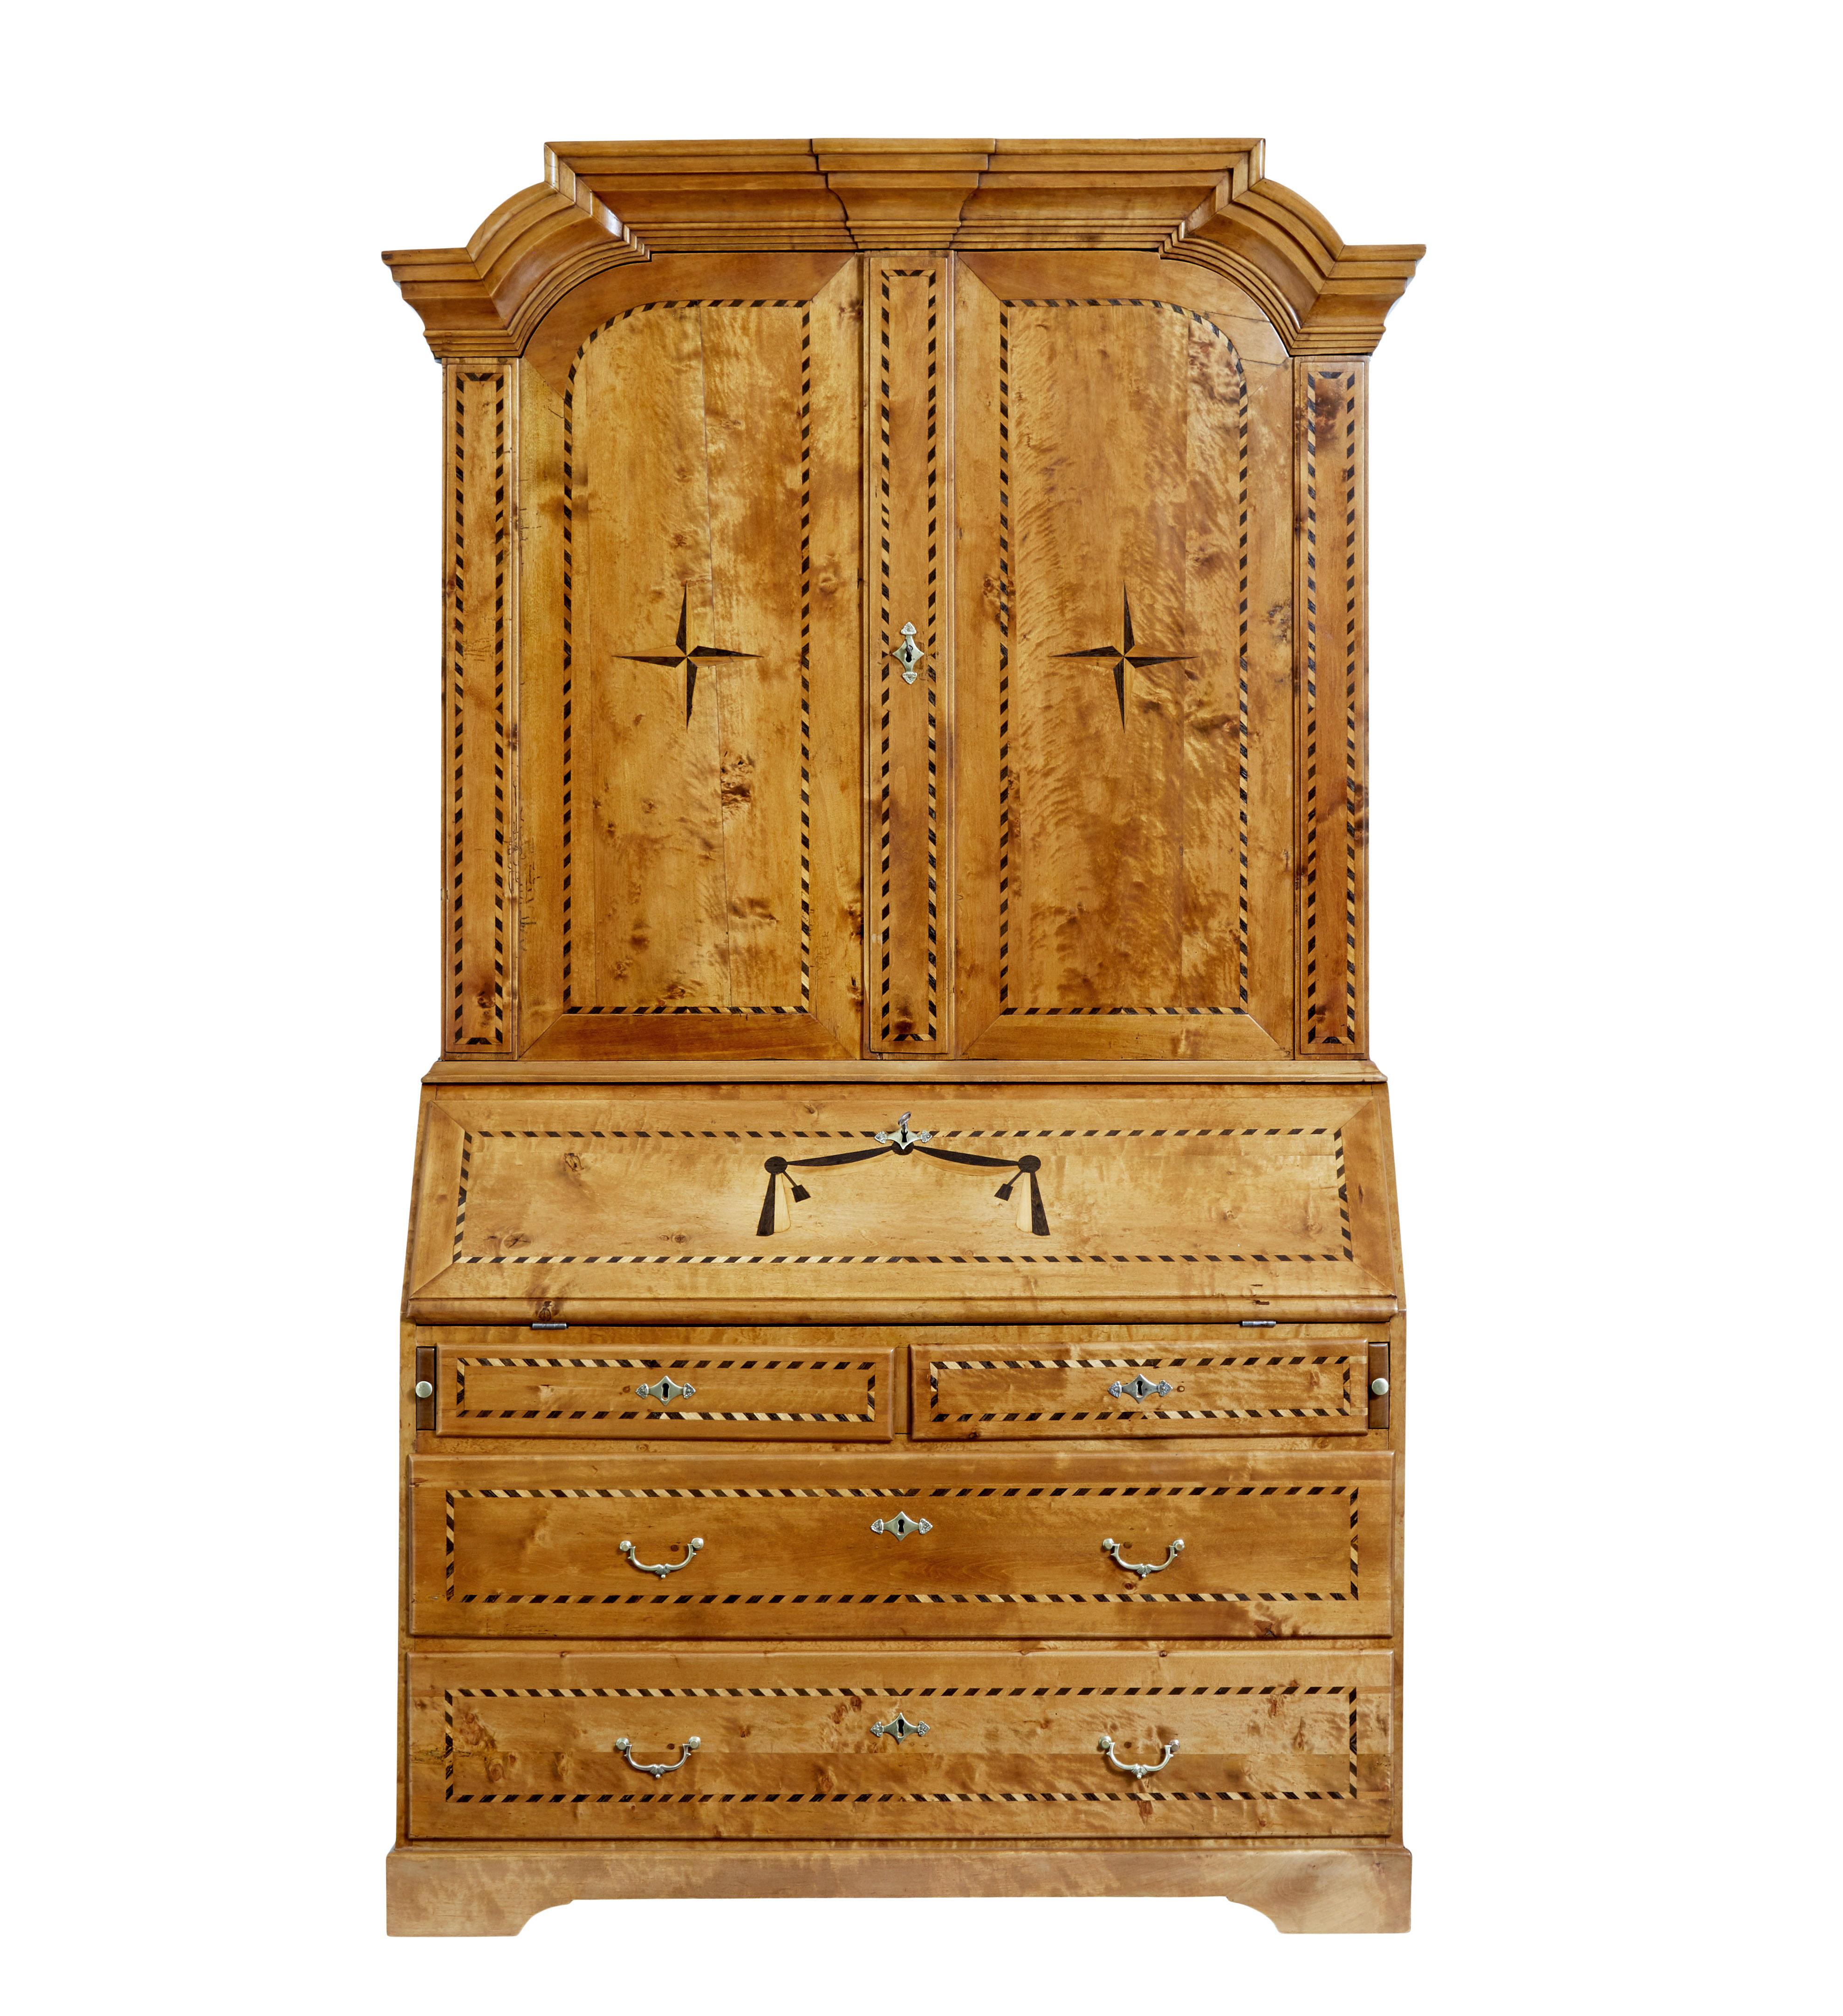 Swedish 1870s Birch Inlaid Secretary with Inlaid Motifs and Slant Front Desk For Sale 3